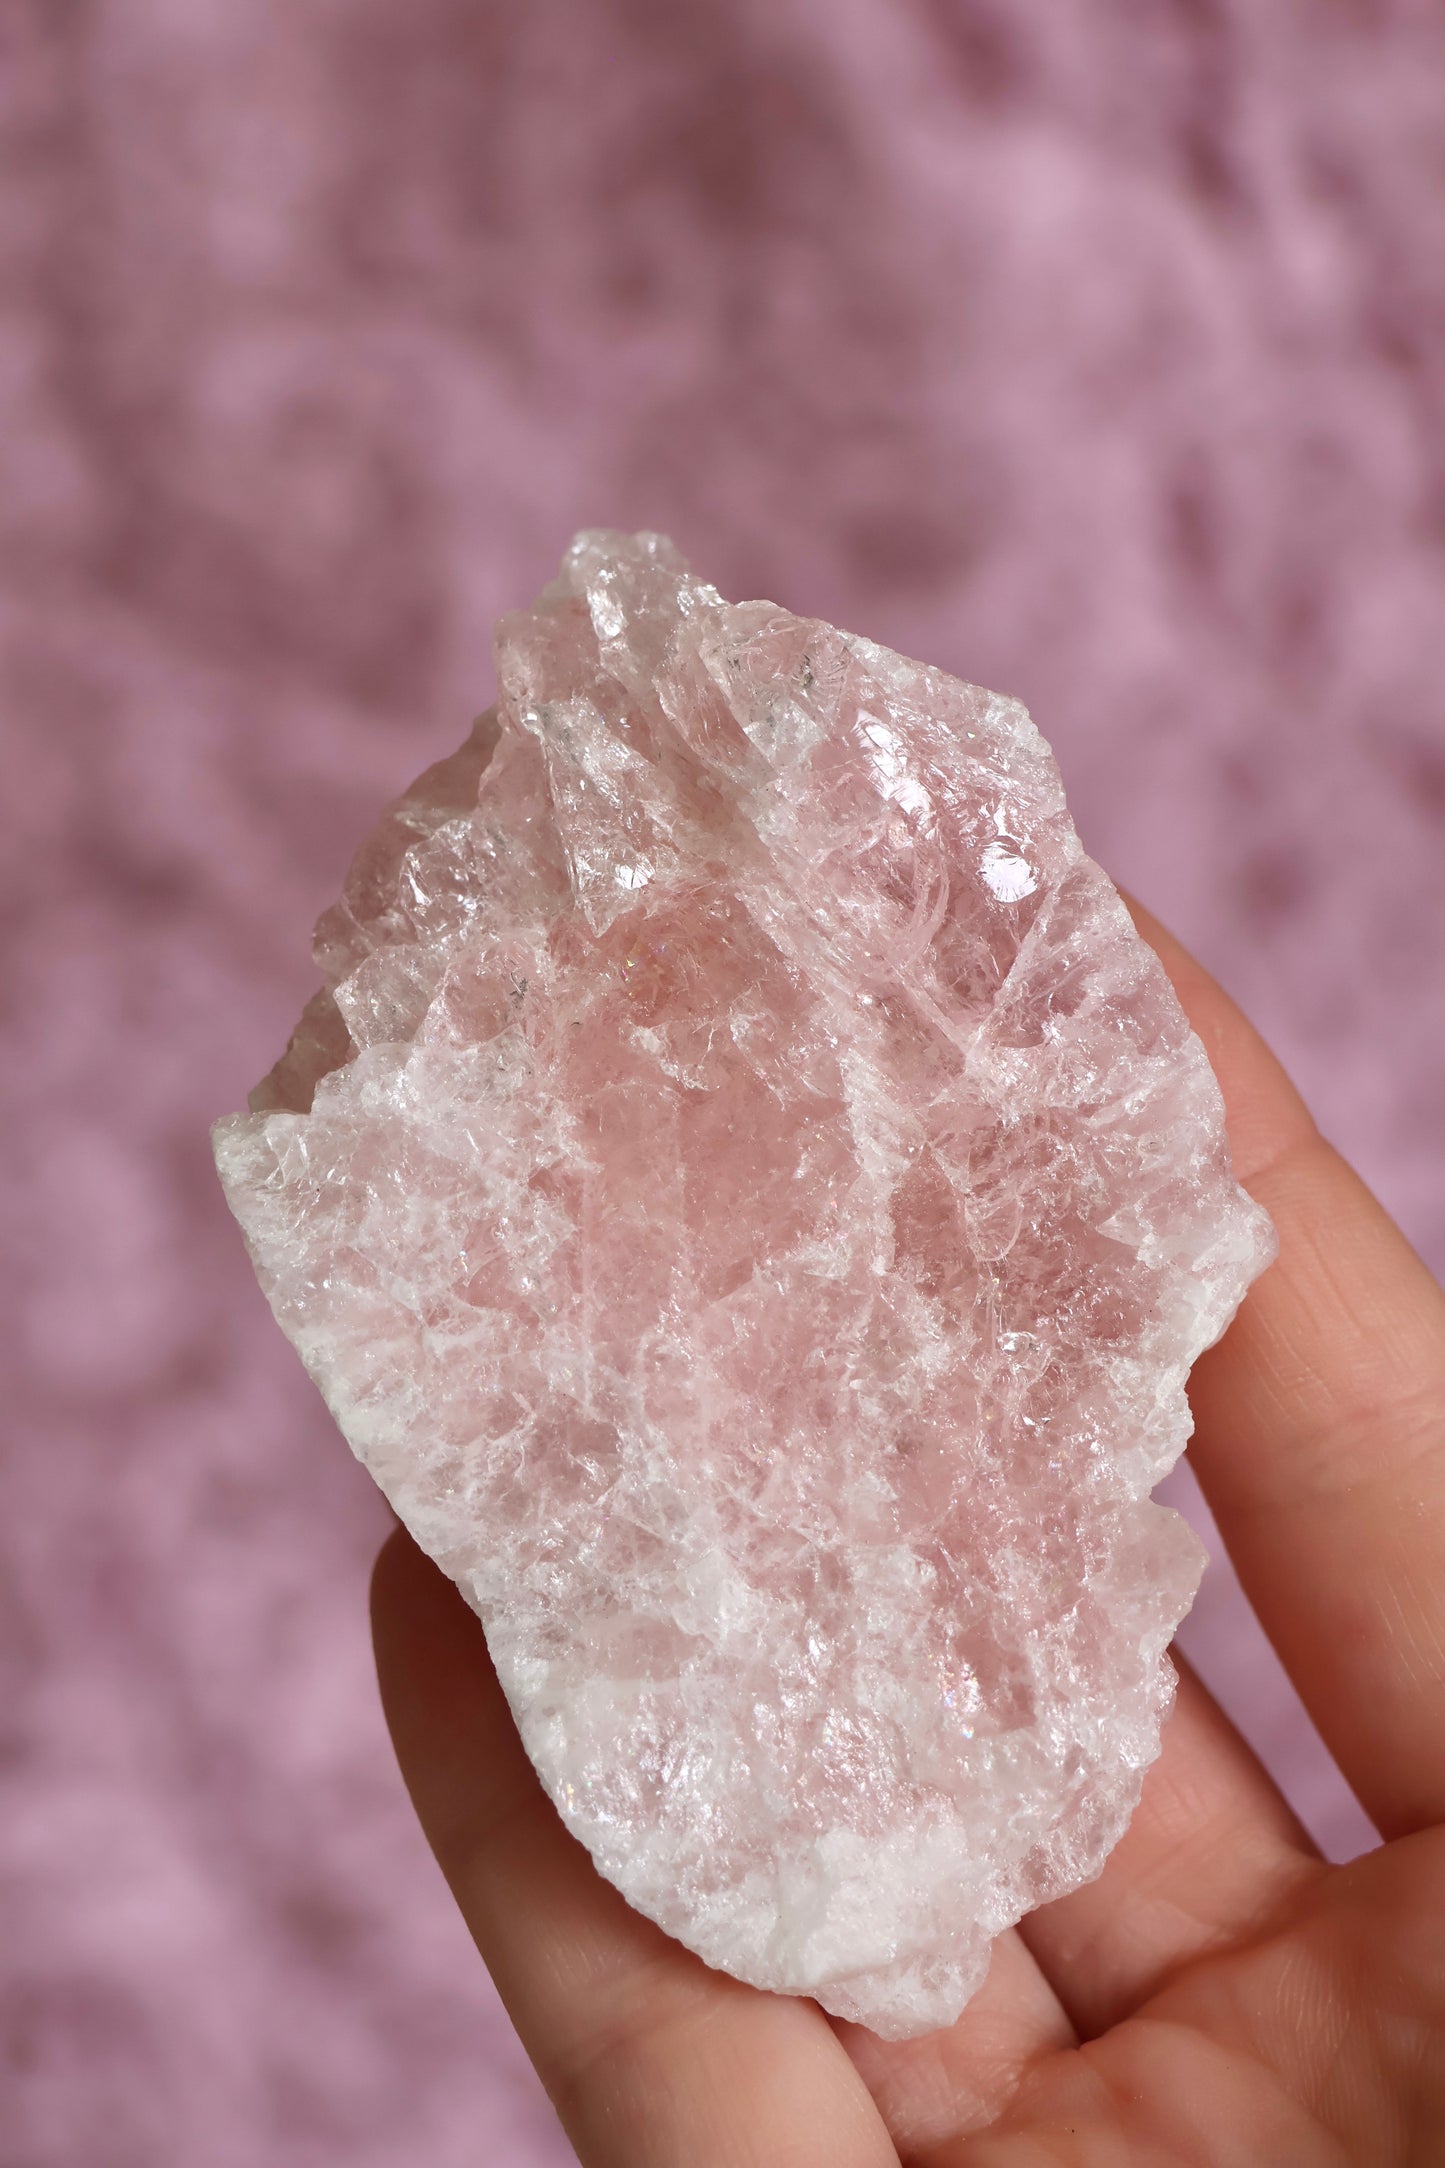 Morganite on stand 002